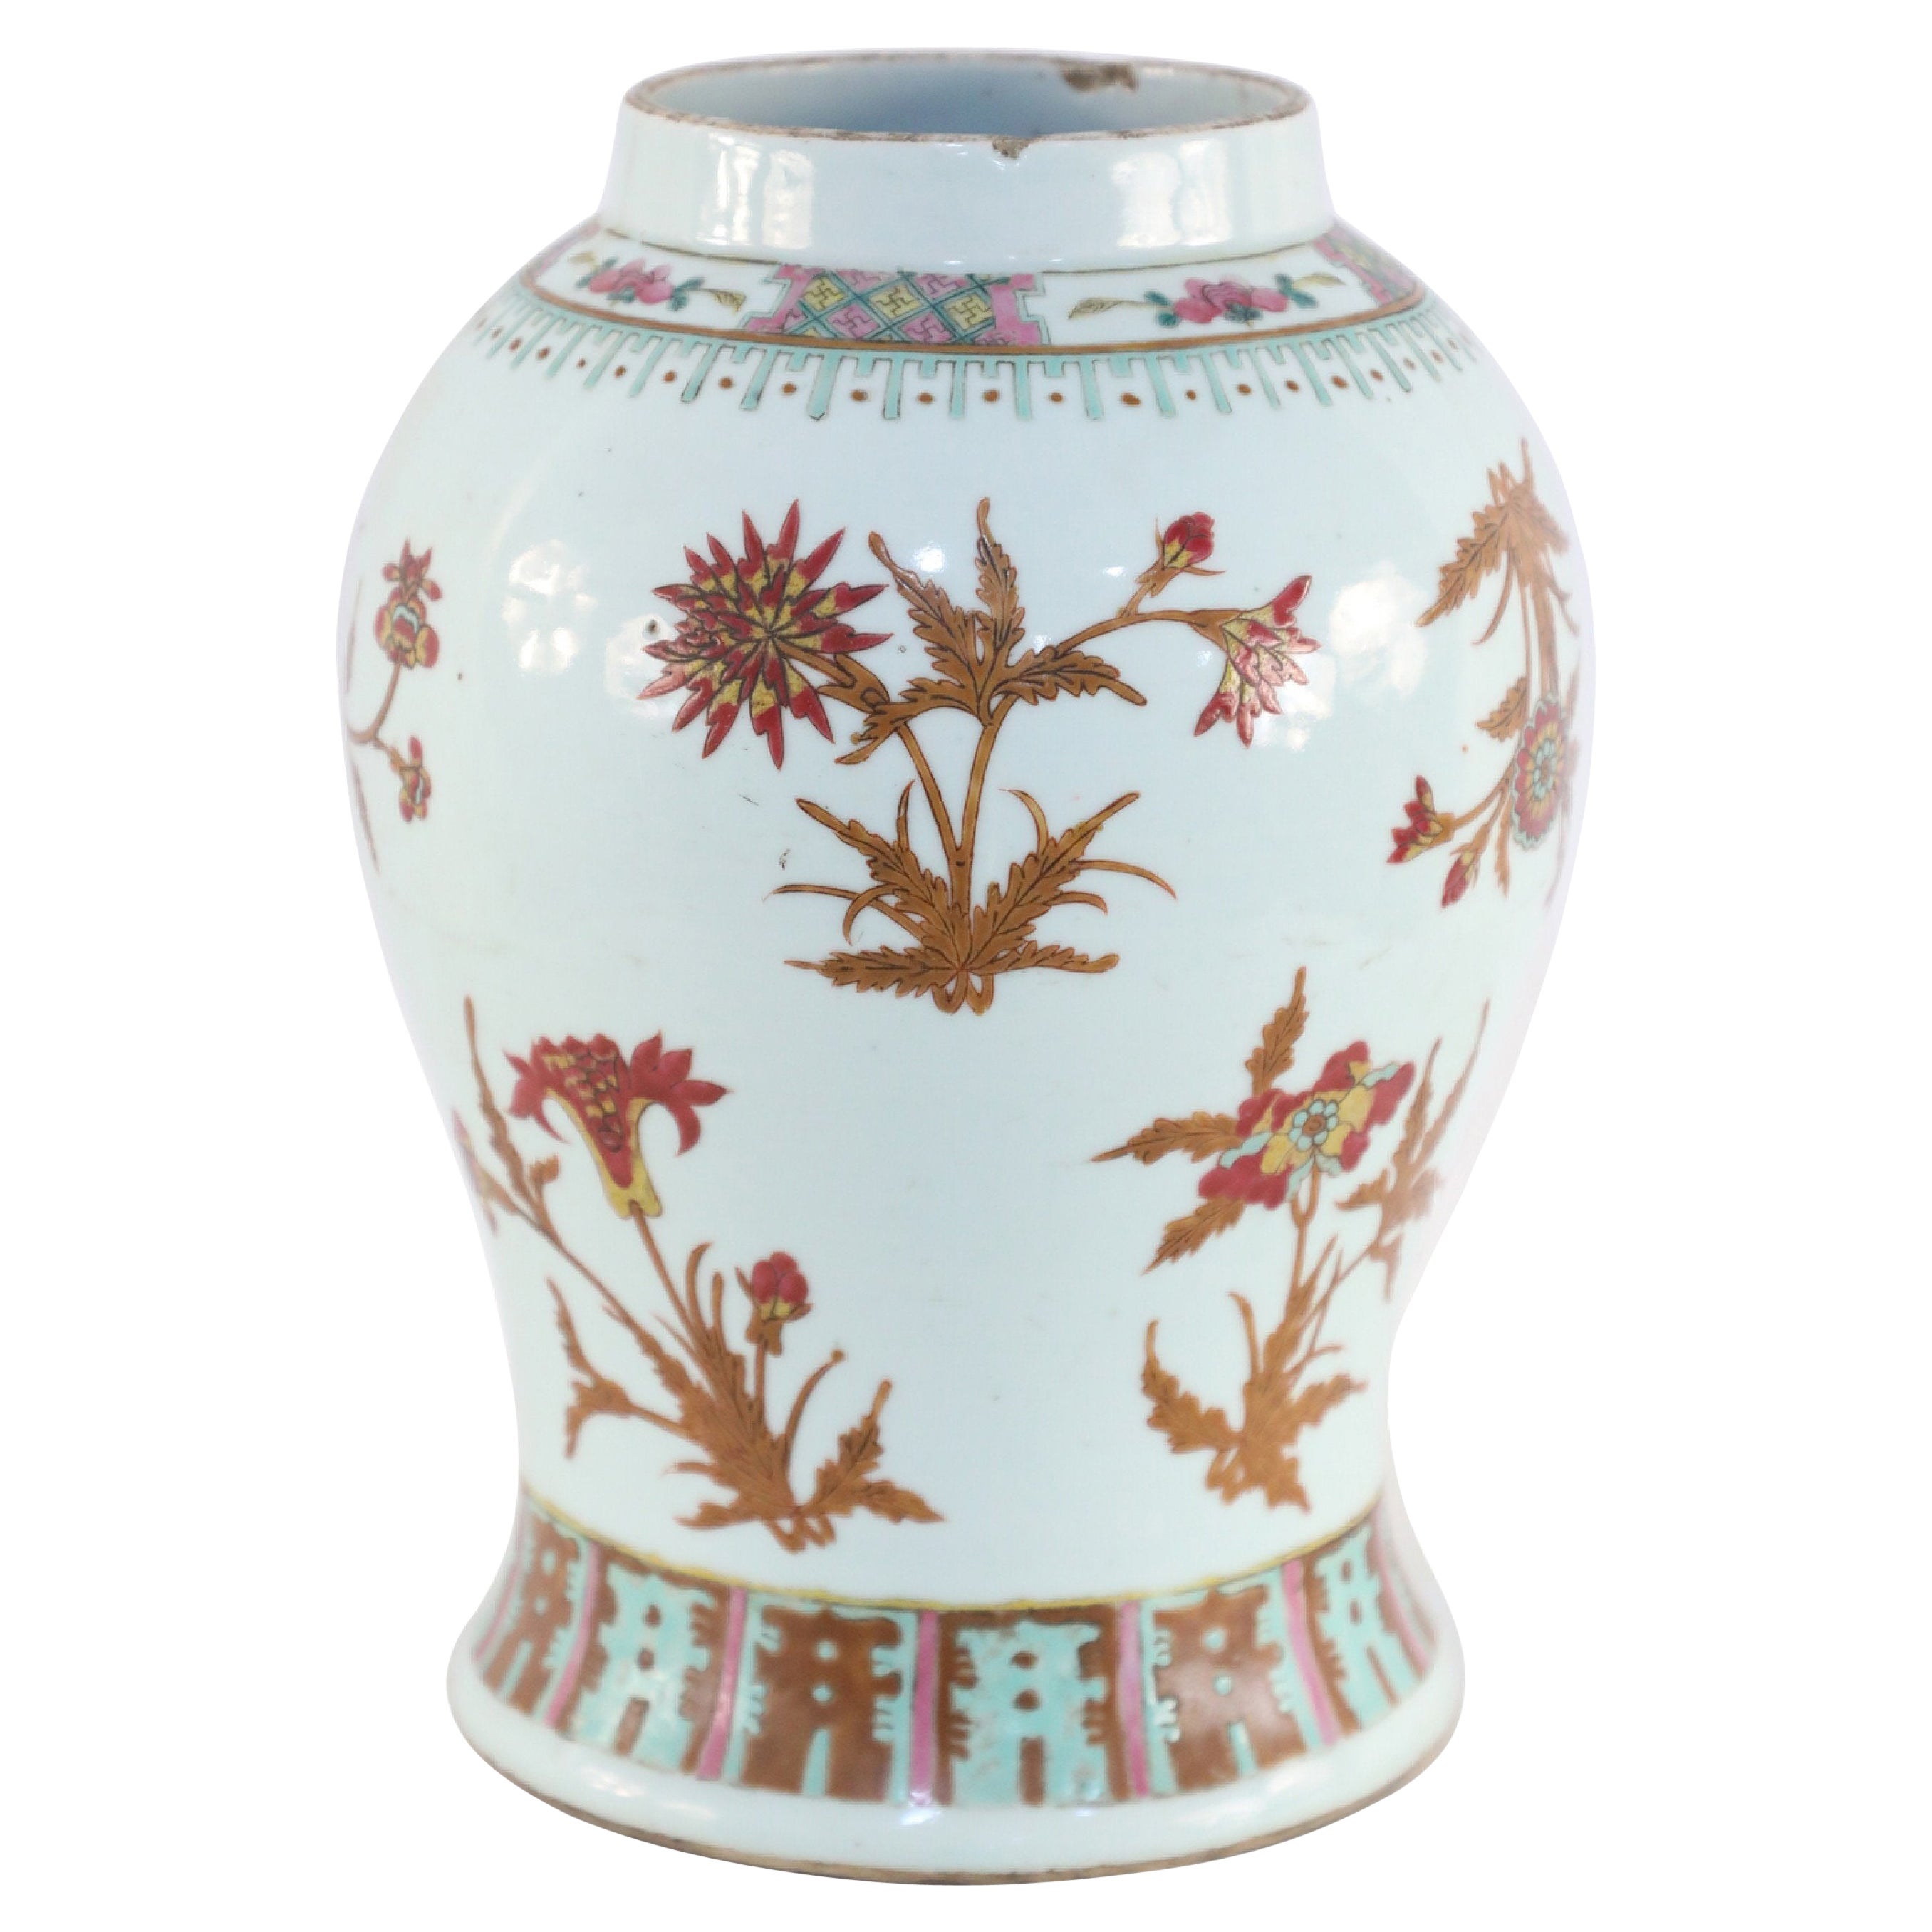 Chinese White, Brown, and Red Floral Design Porcelain Vase For Sale